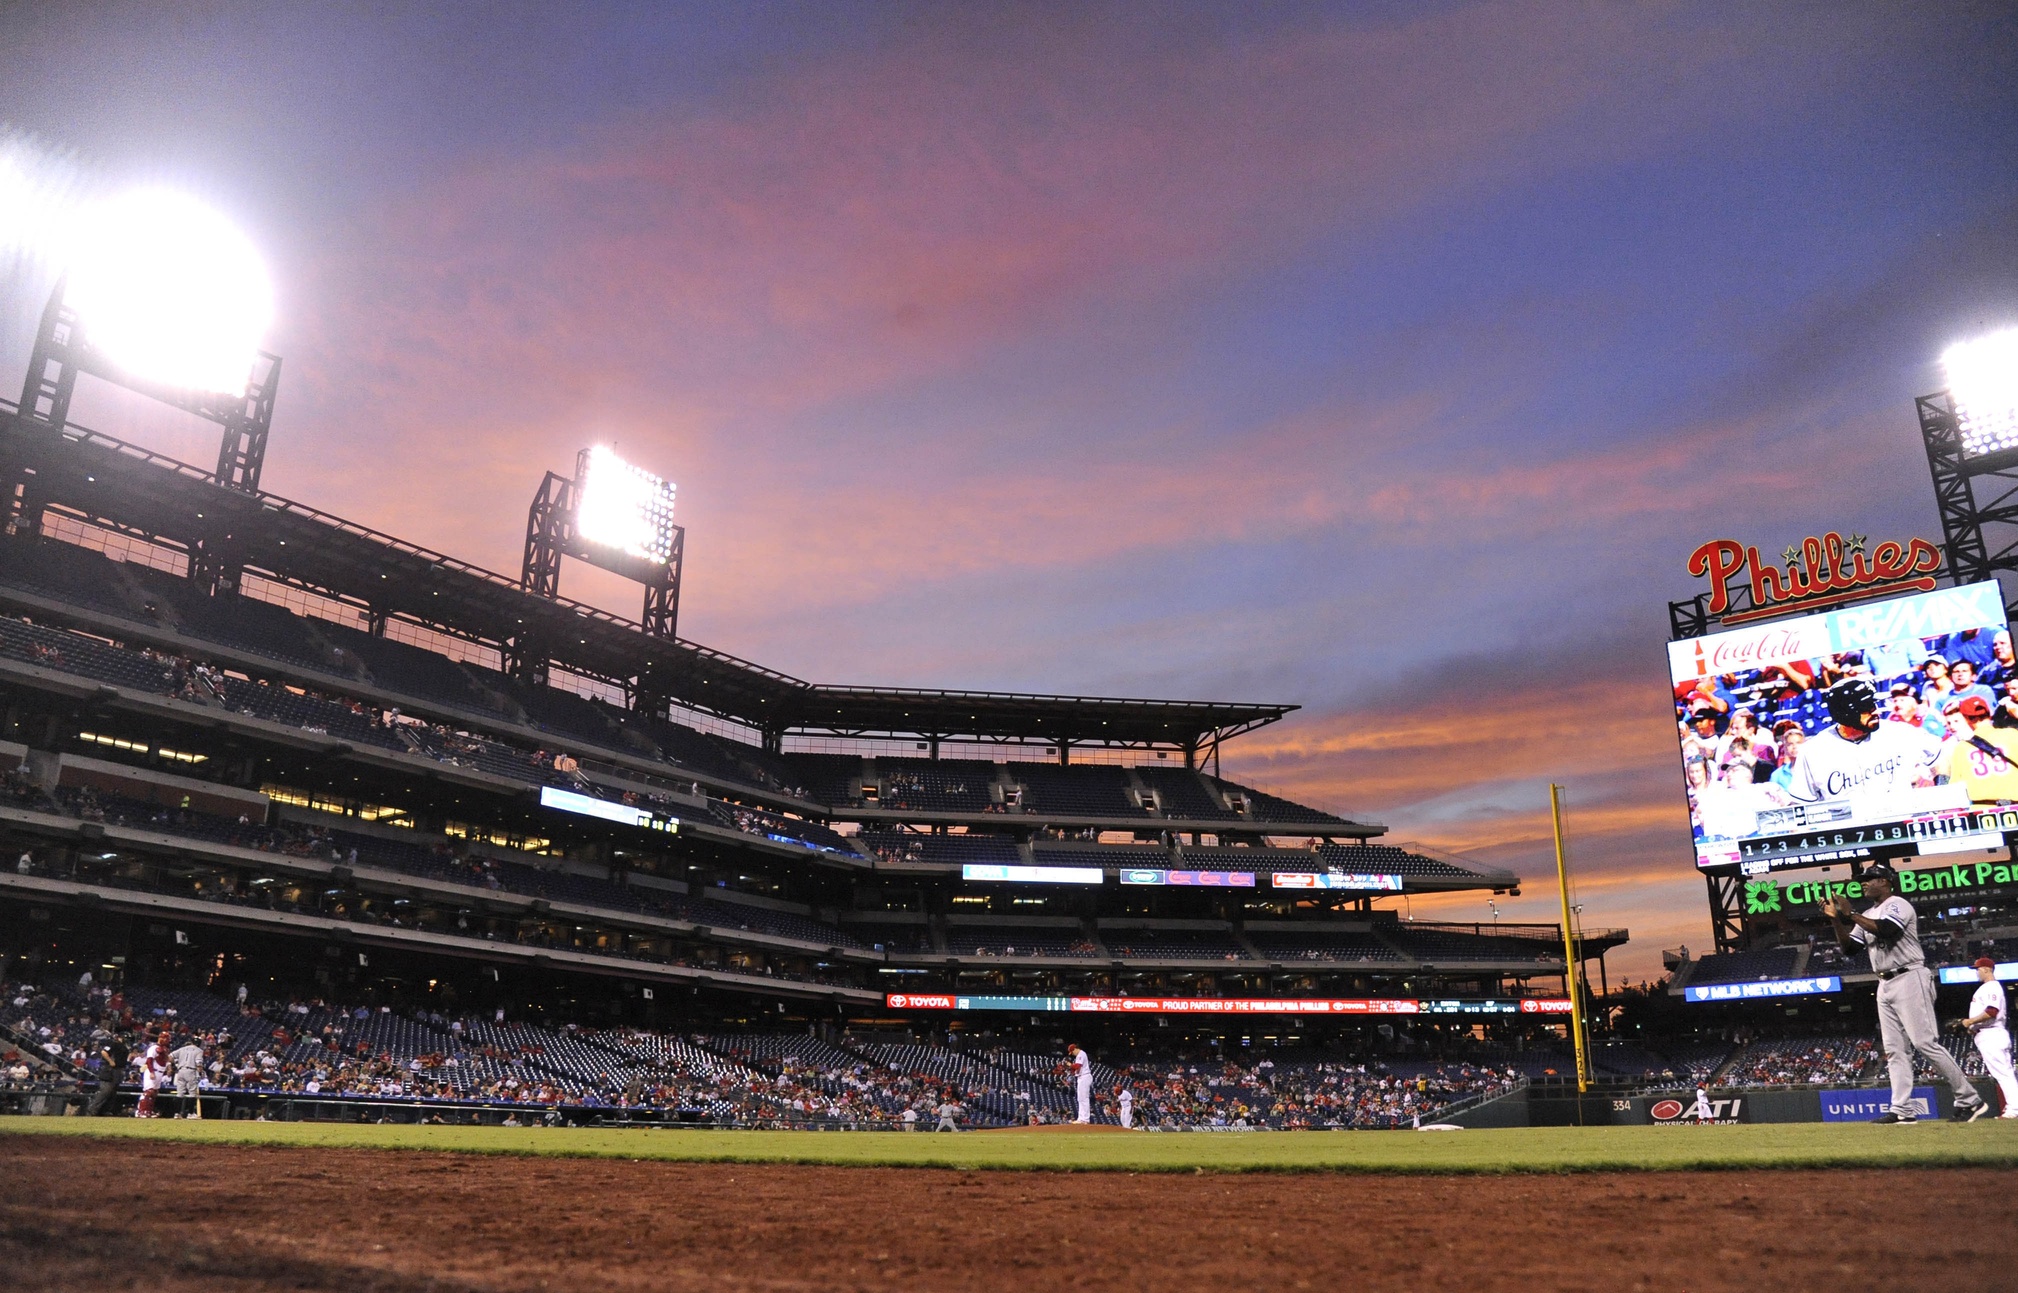 Uber and the Phillies Are Offering $2.15 Rides to the Home Opener, but There’s a Catch